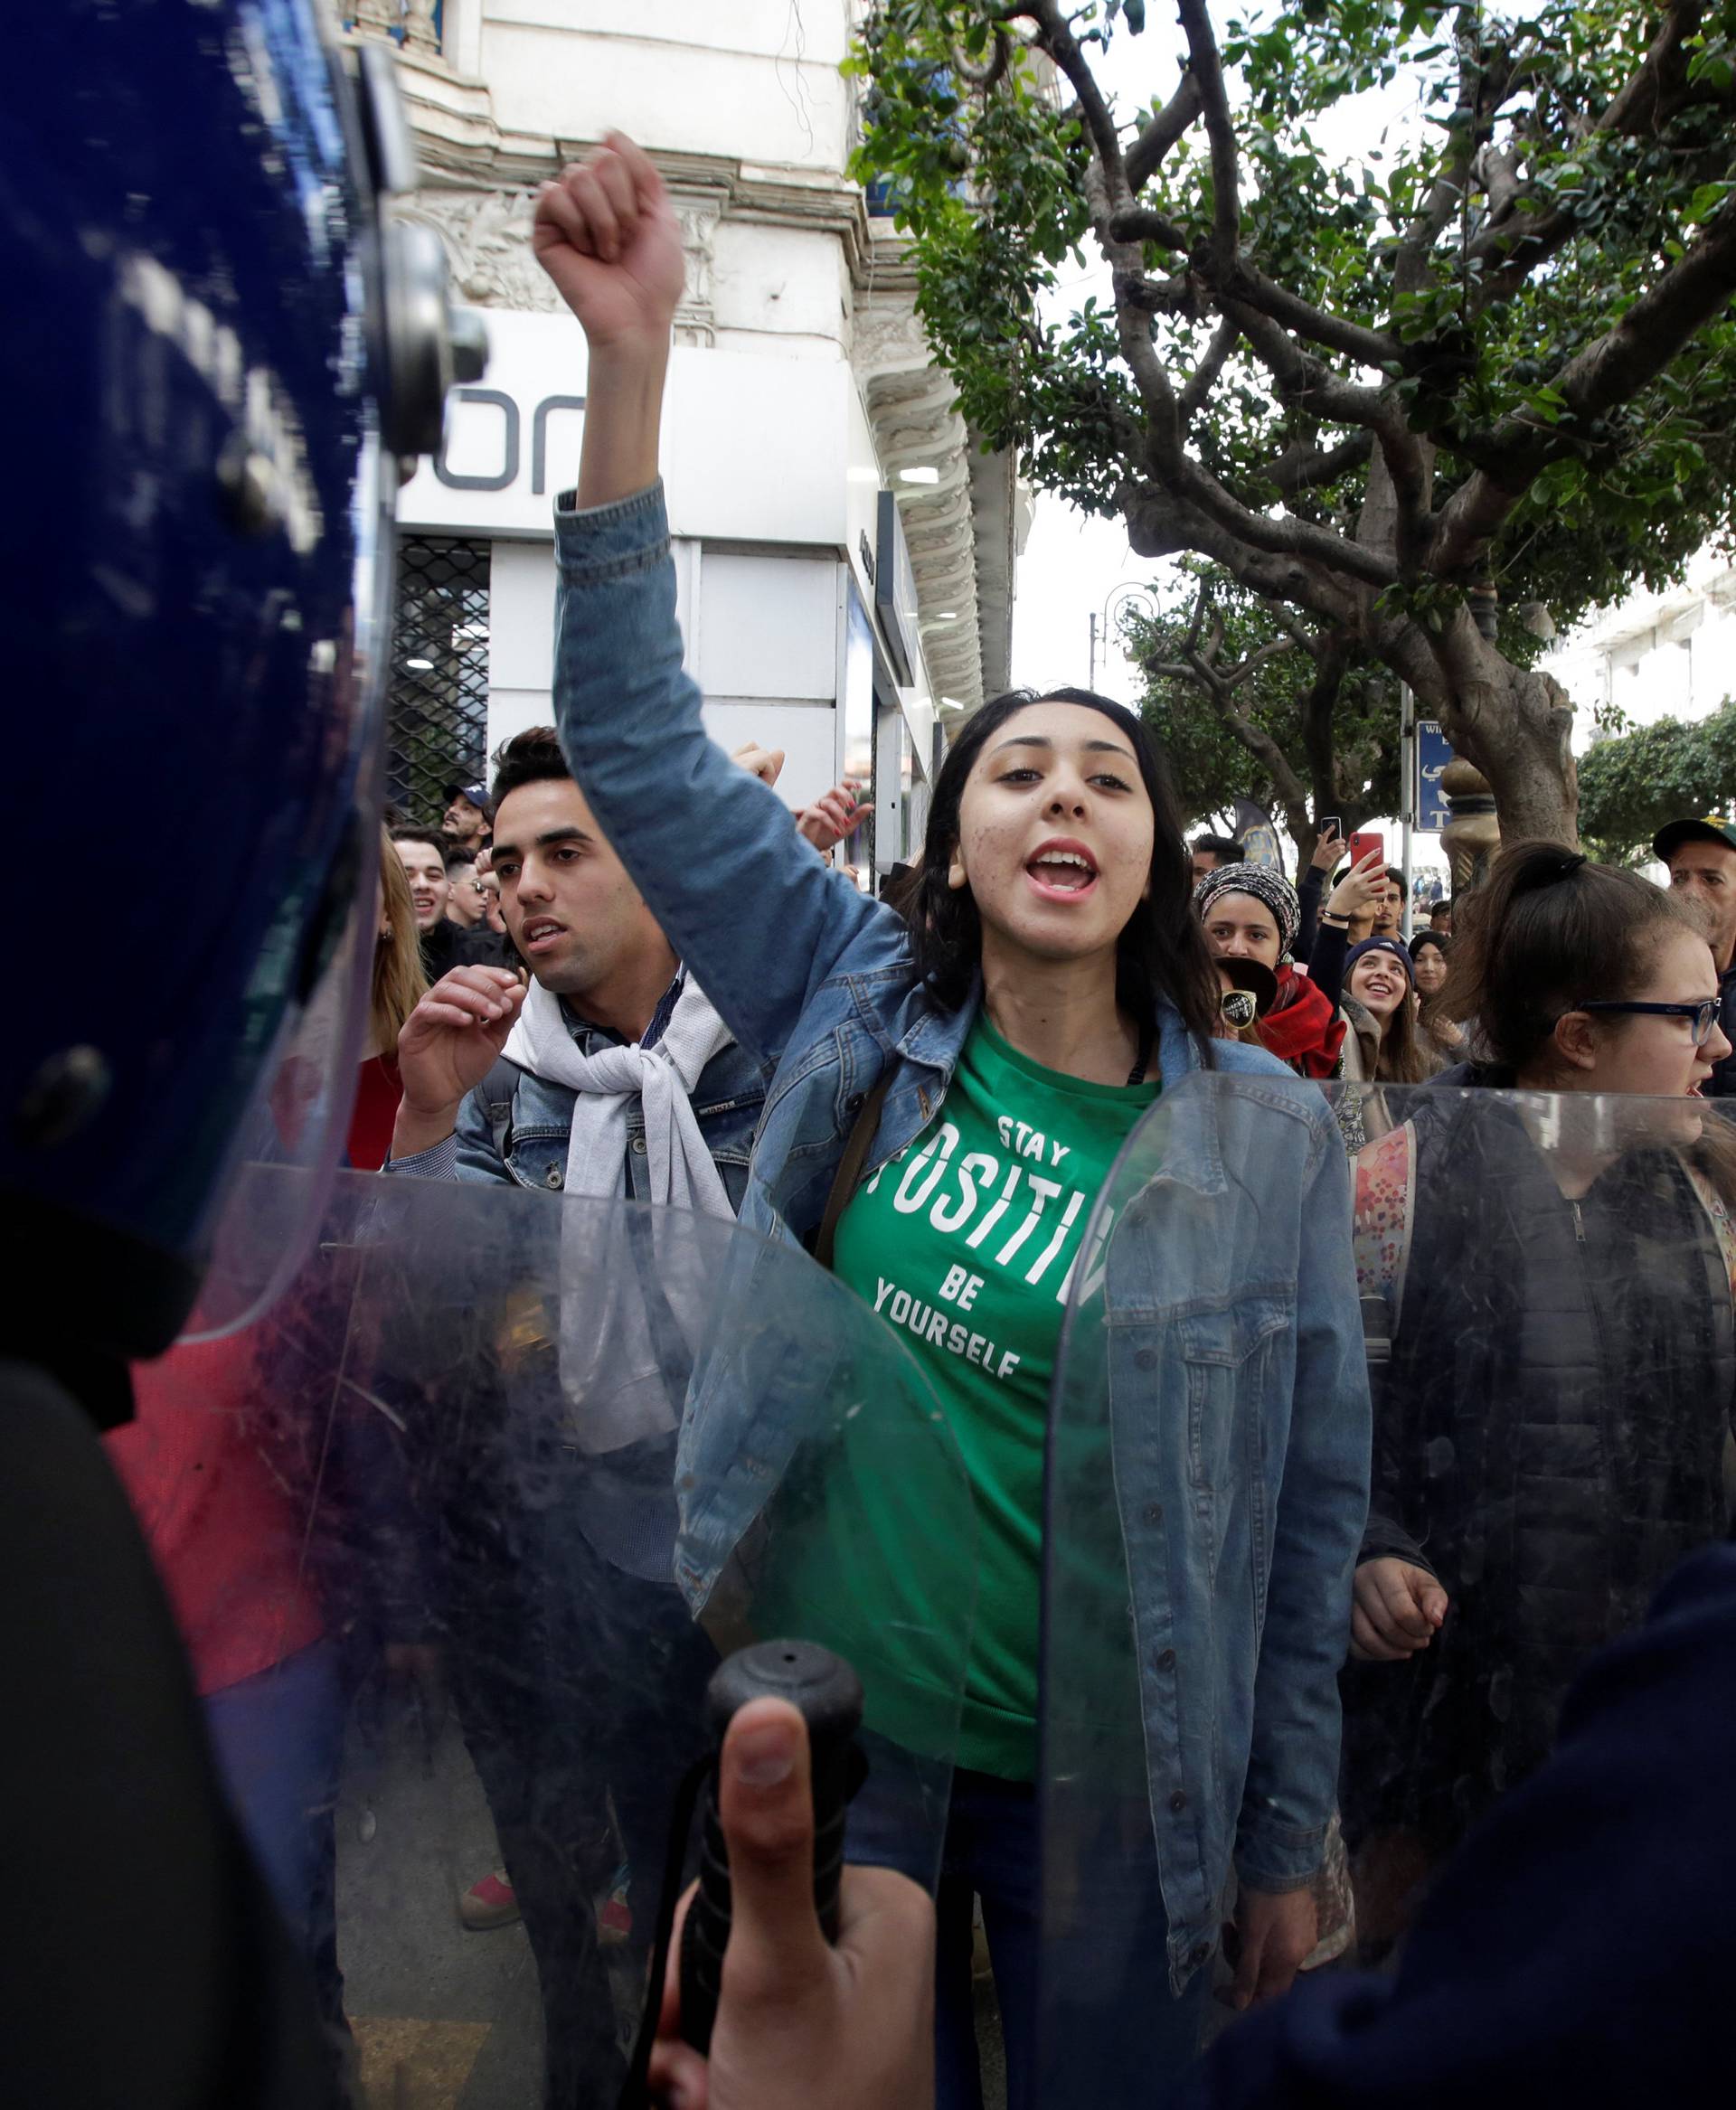 Police stand guard as students protest against President Abdelaziz Bouteflika's plan to extend his 20-year rule by seeking a fifth term in Algiers